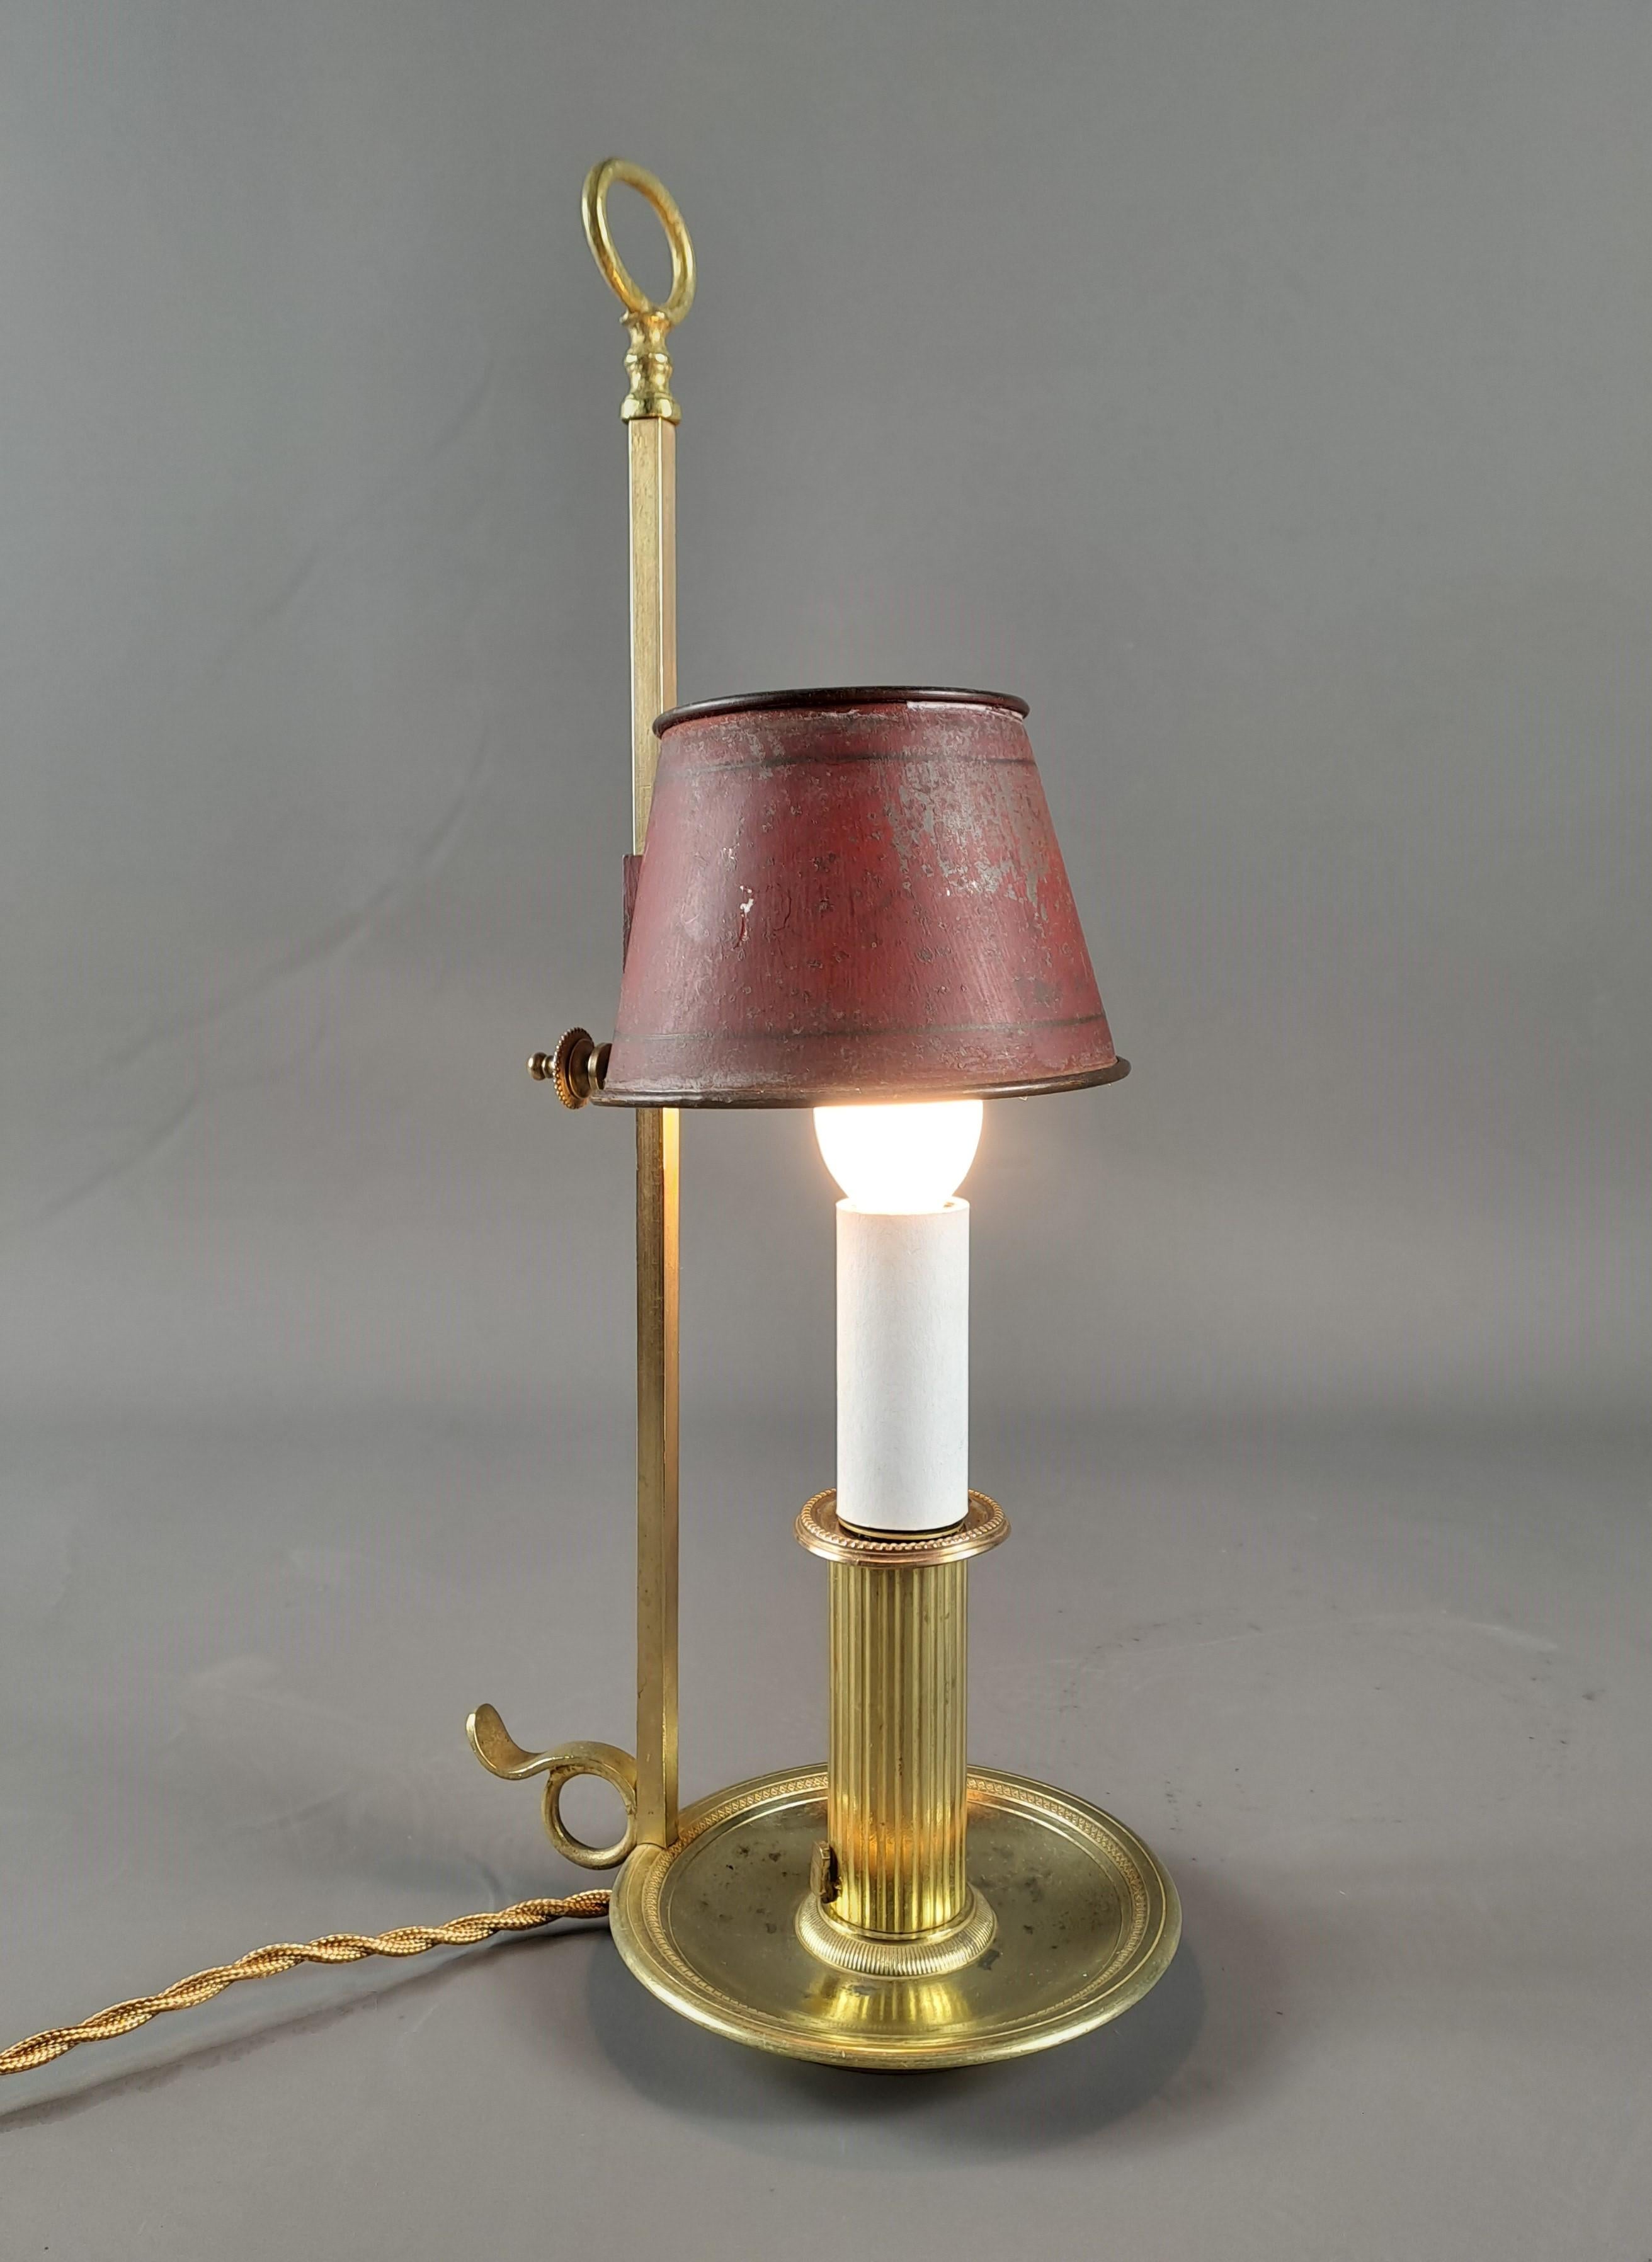 Charming little bouillotte lamp in gilded and chiseled bronze, with one arm of light and red lacquered sheet metal lampshade.

Old work from the beginning of the 19th century, empire period

Good condition, electrified by our workshop